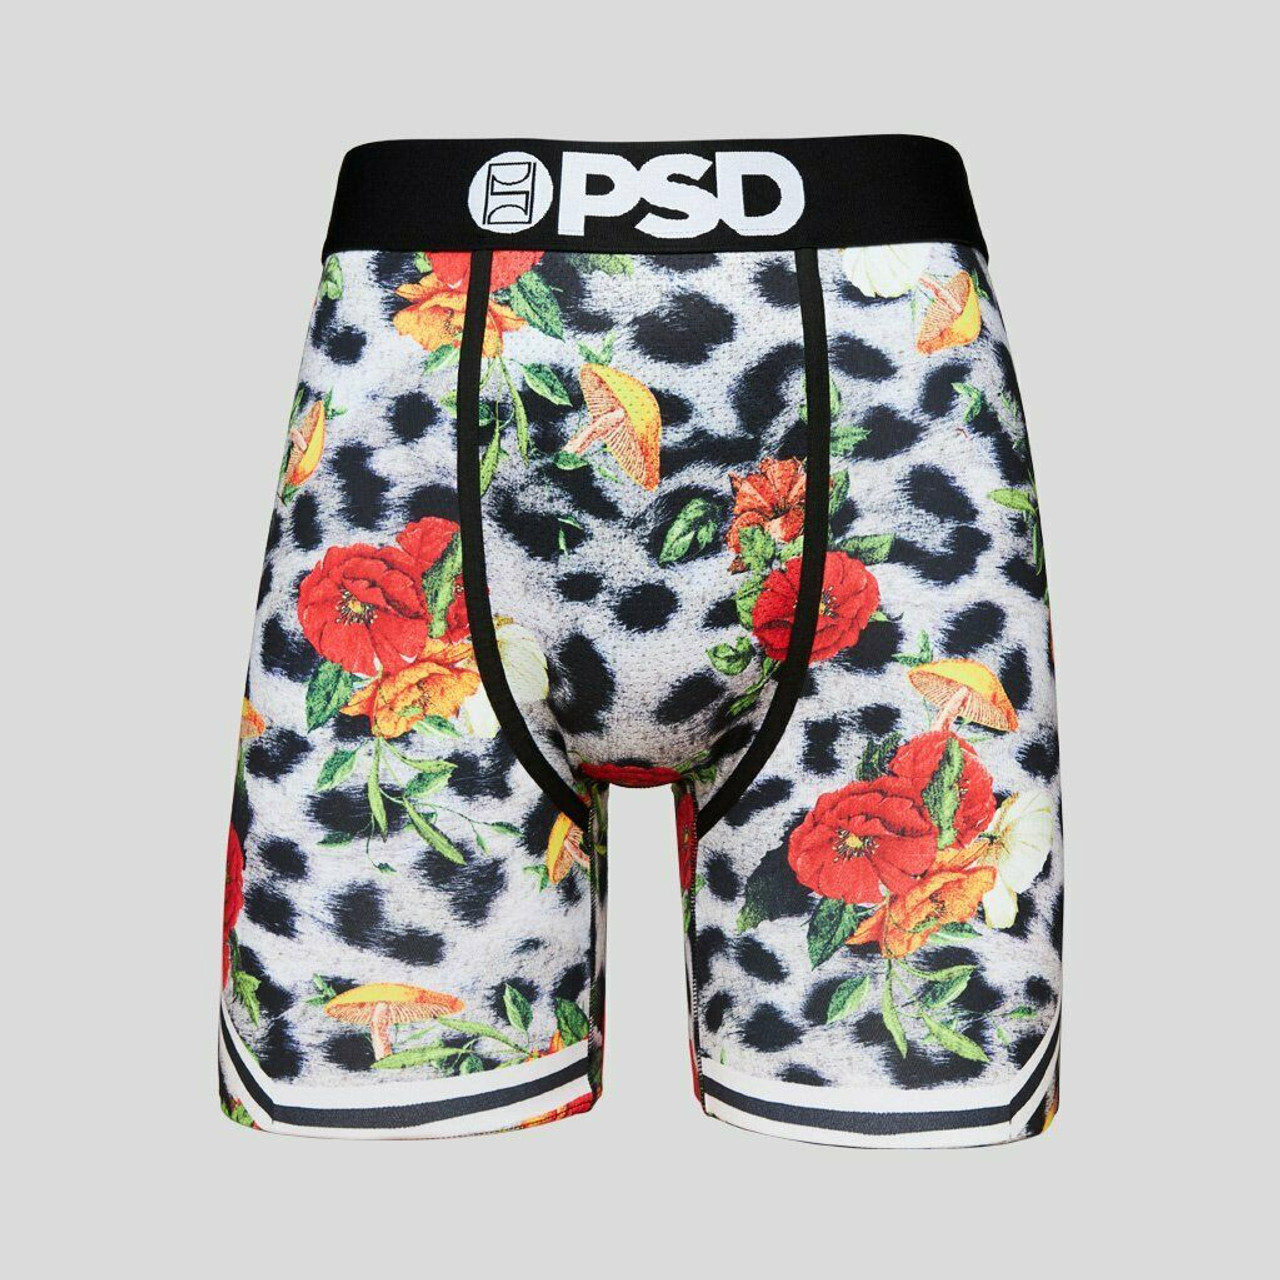 PSD Striped Floral Fur Leopard Animal Athletic Boxers Briefs Underwear  221180092 - Fearless Apparel